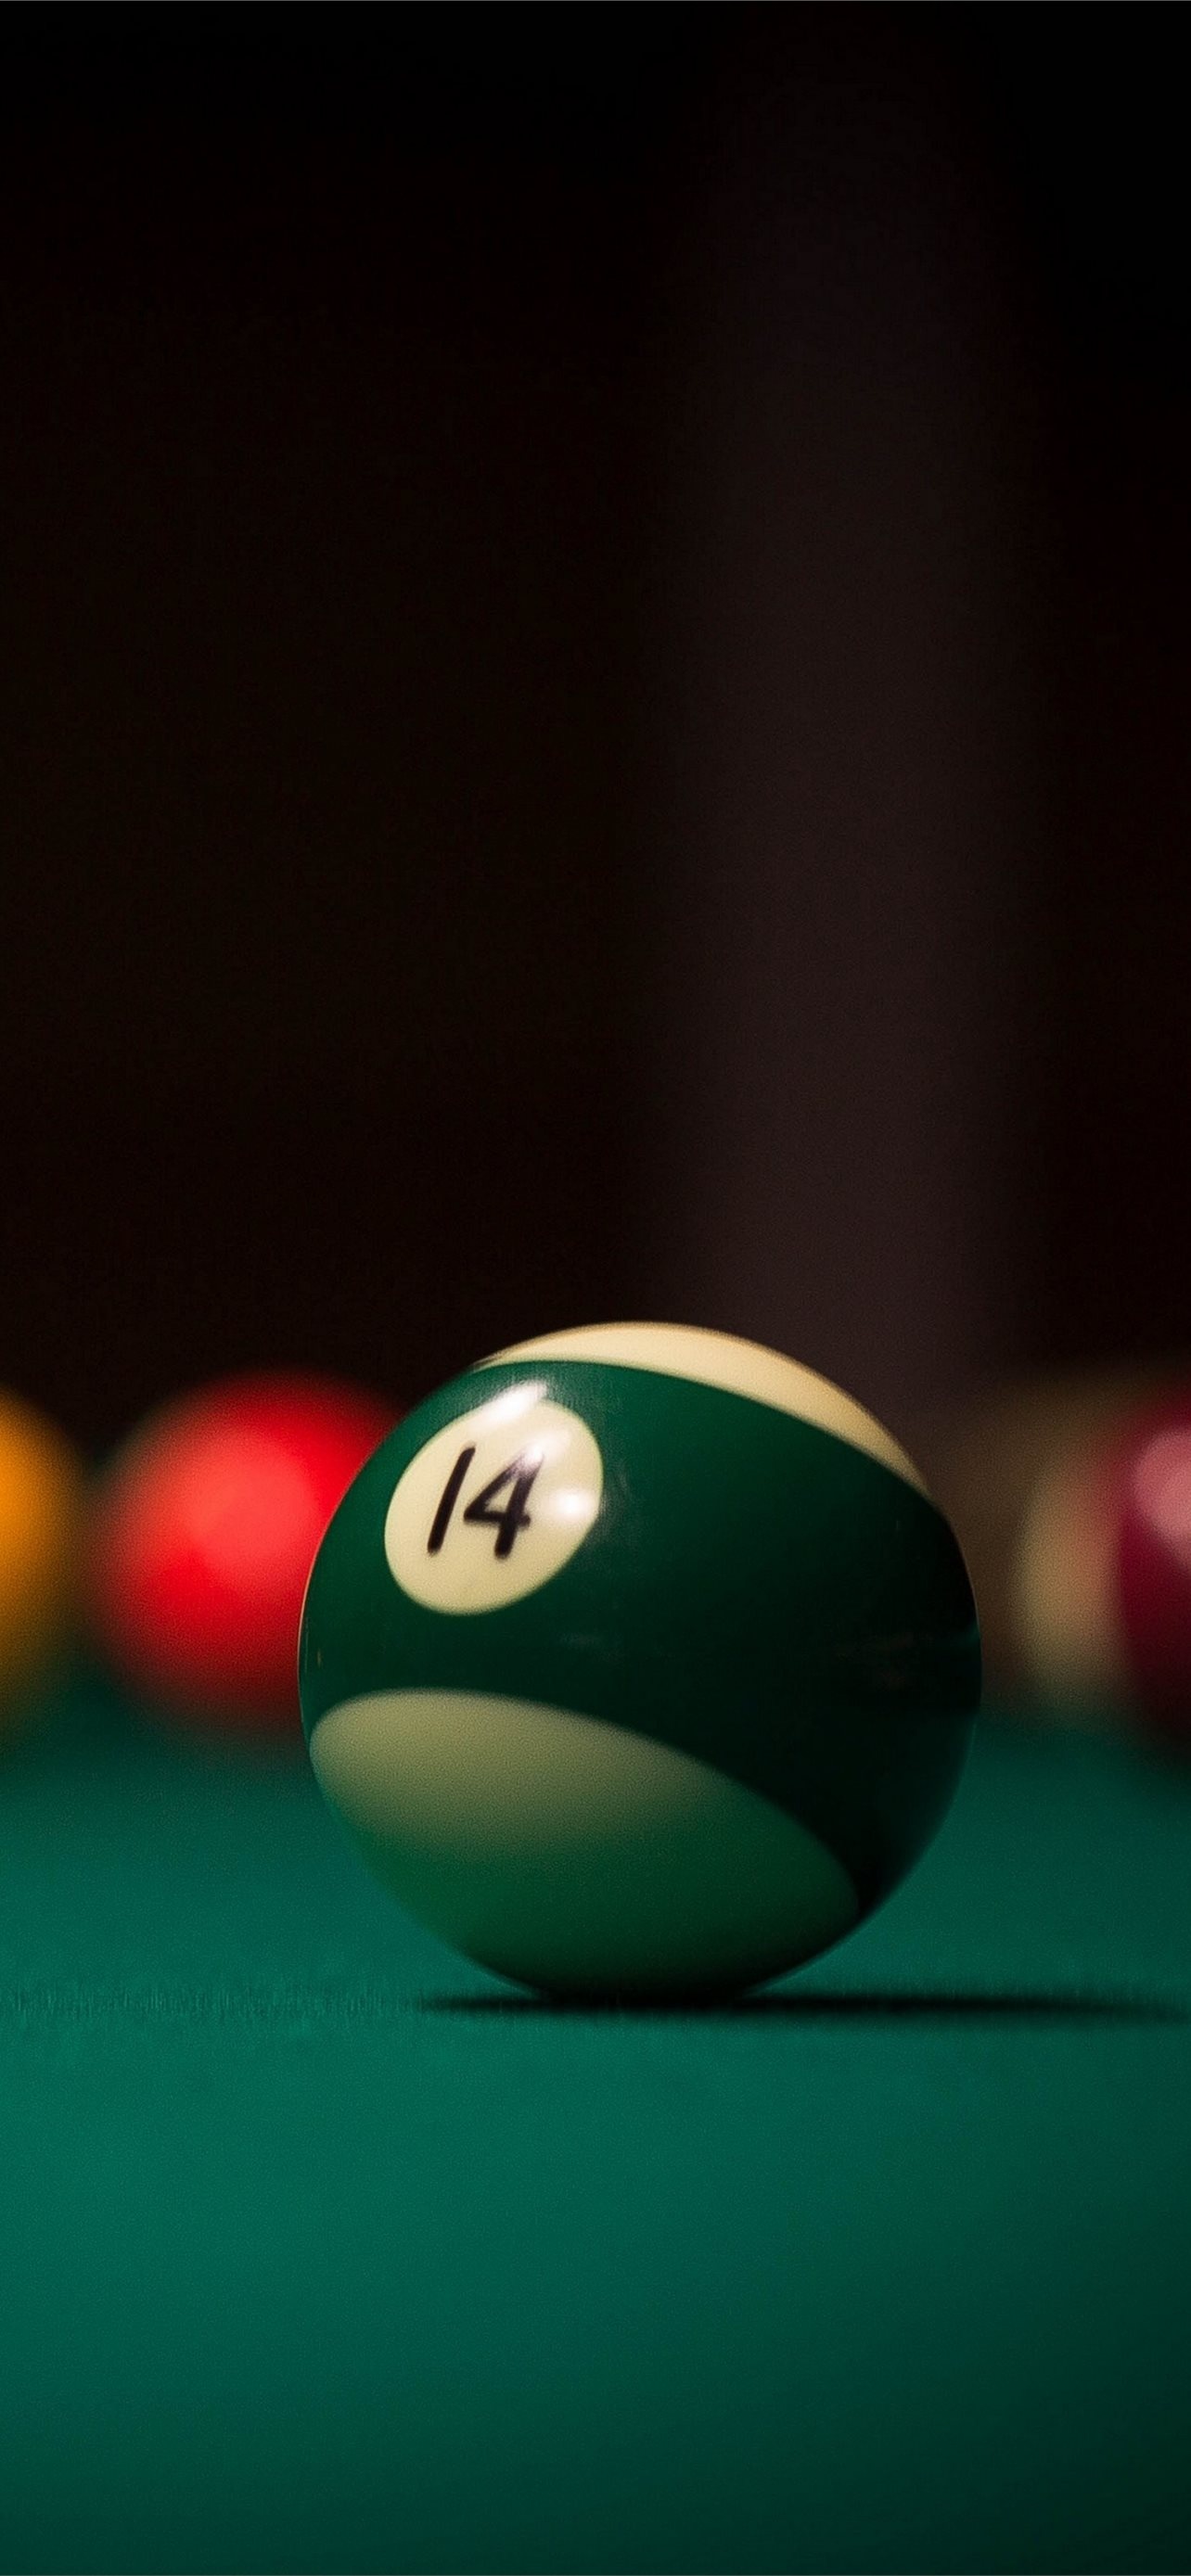 Cue Sports: A billiard object ball, A small, hard ball used in carom billiards, pool, and classic snooker. 1290x2780 HD Background.